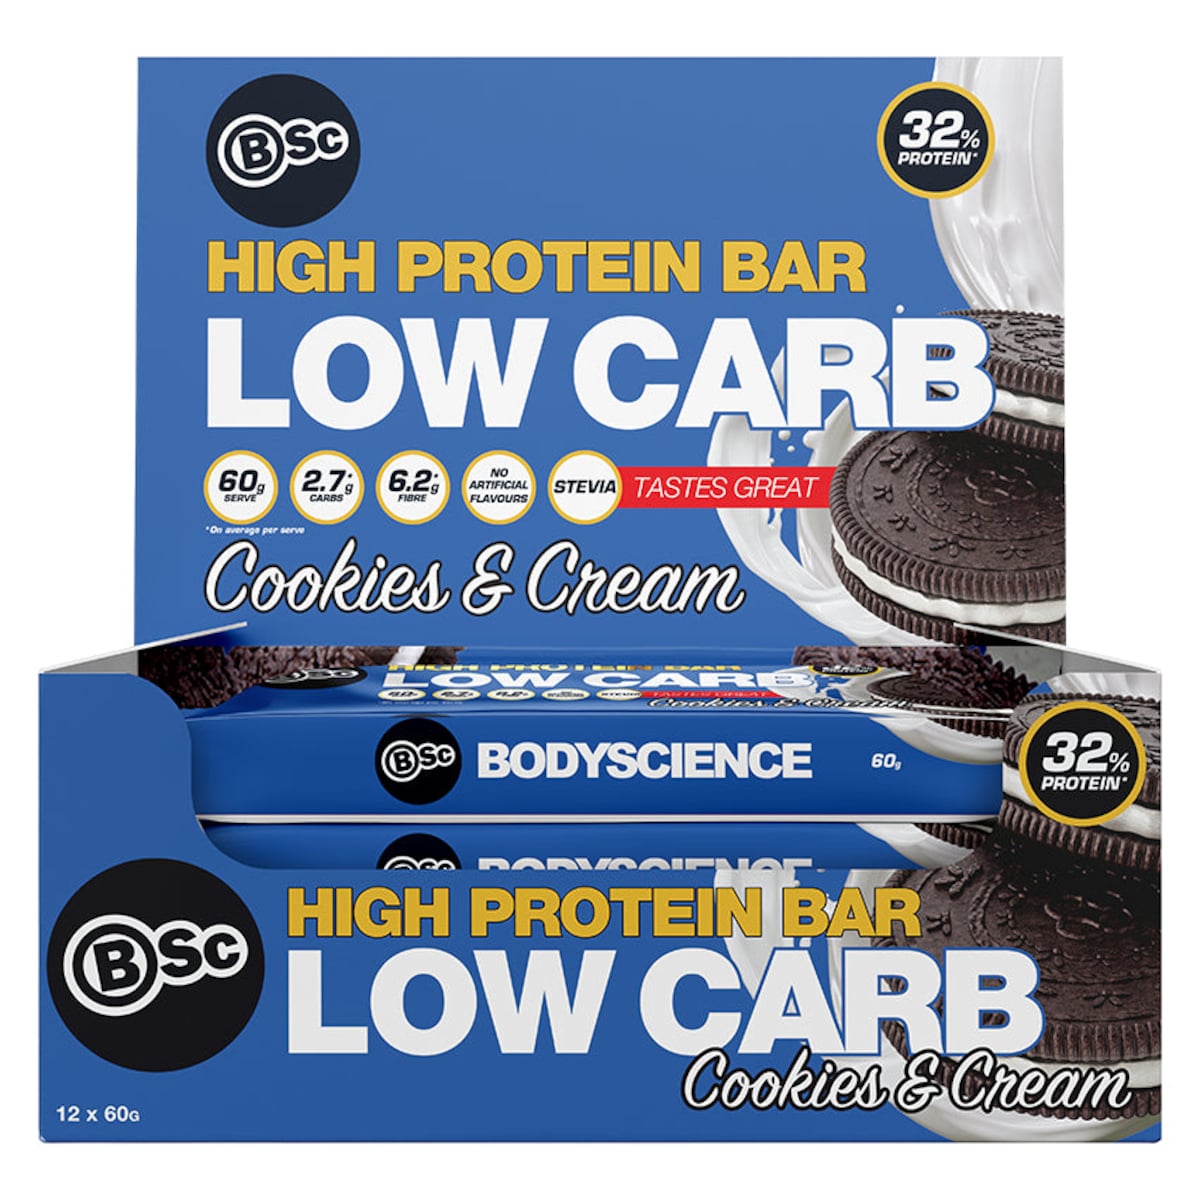 BSc Body Science High Protein Low Carb Bar Cookies & Cream 12 x 60g Australia